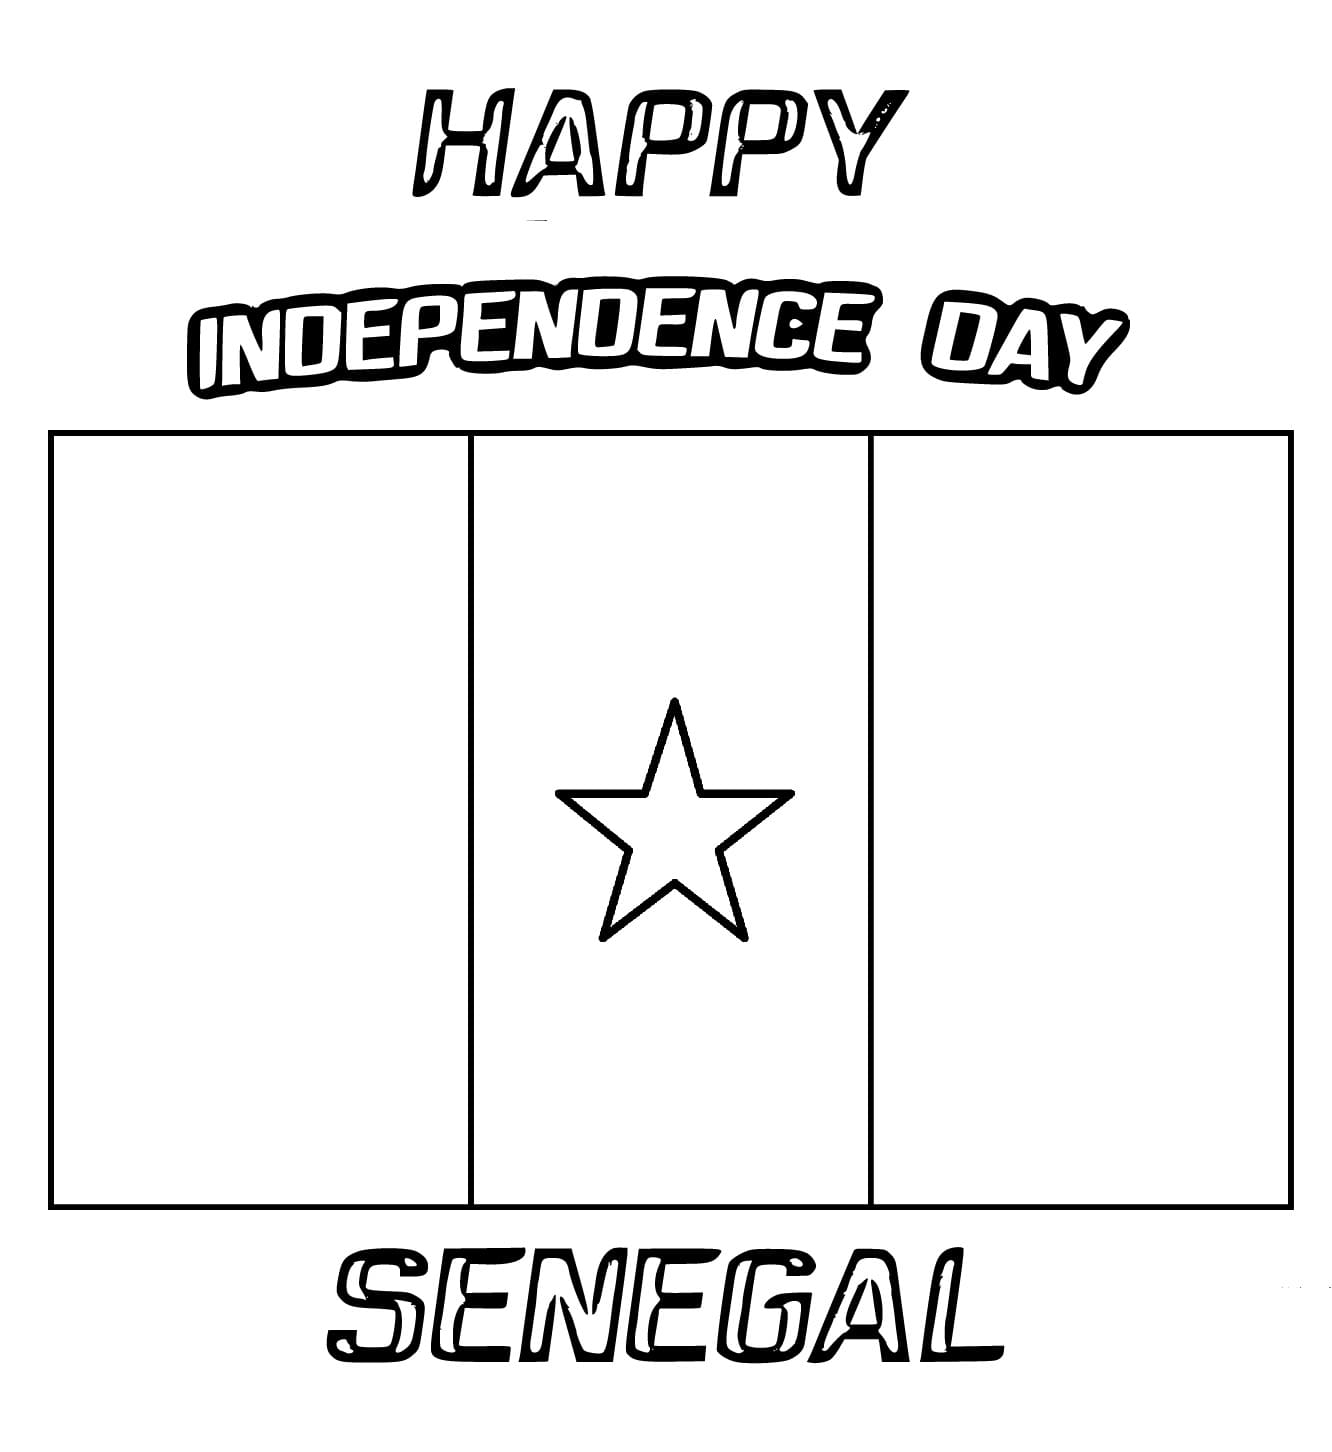 Senegal Independence Day coloring page - Download, Print or Color ...